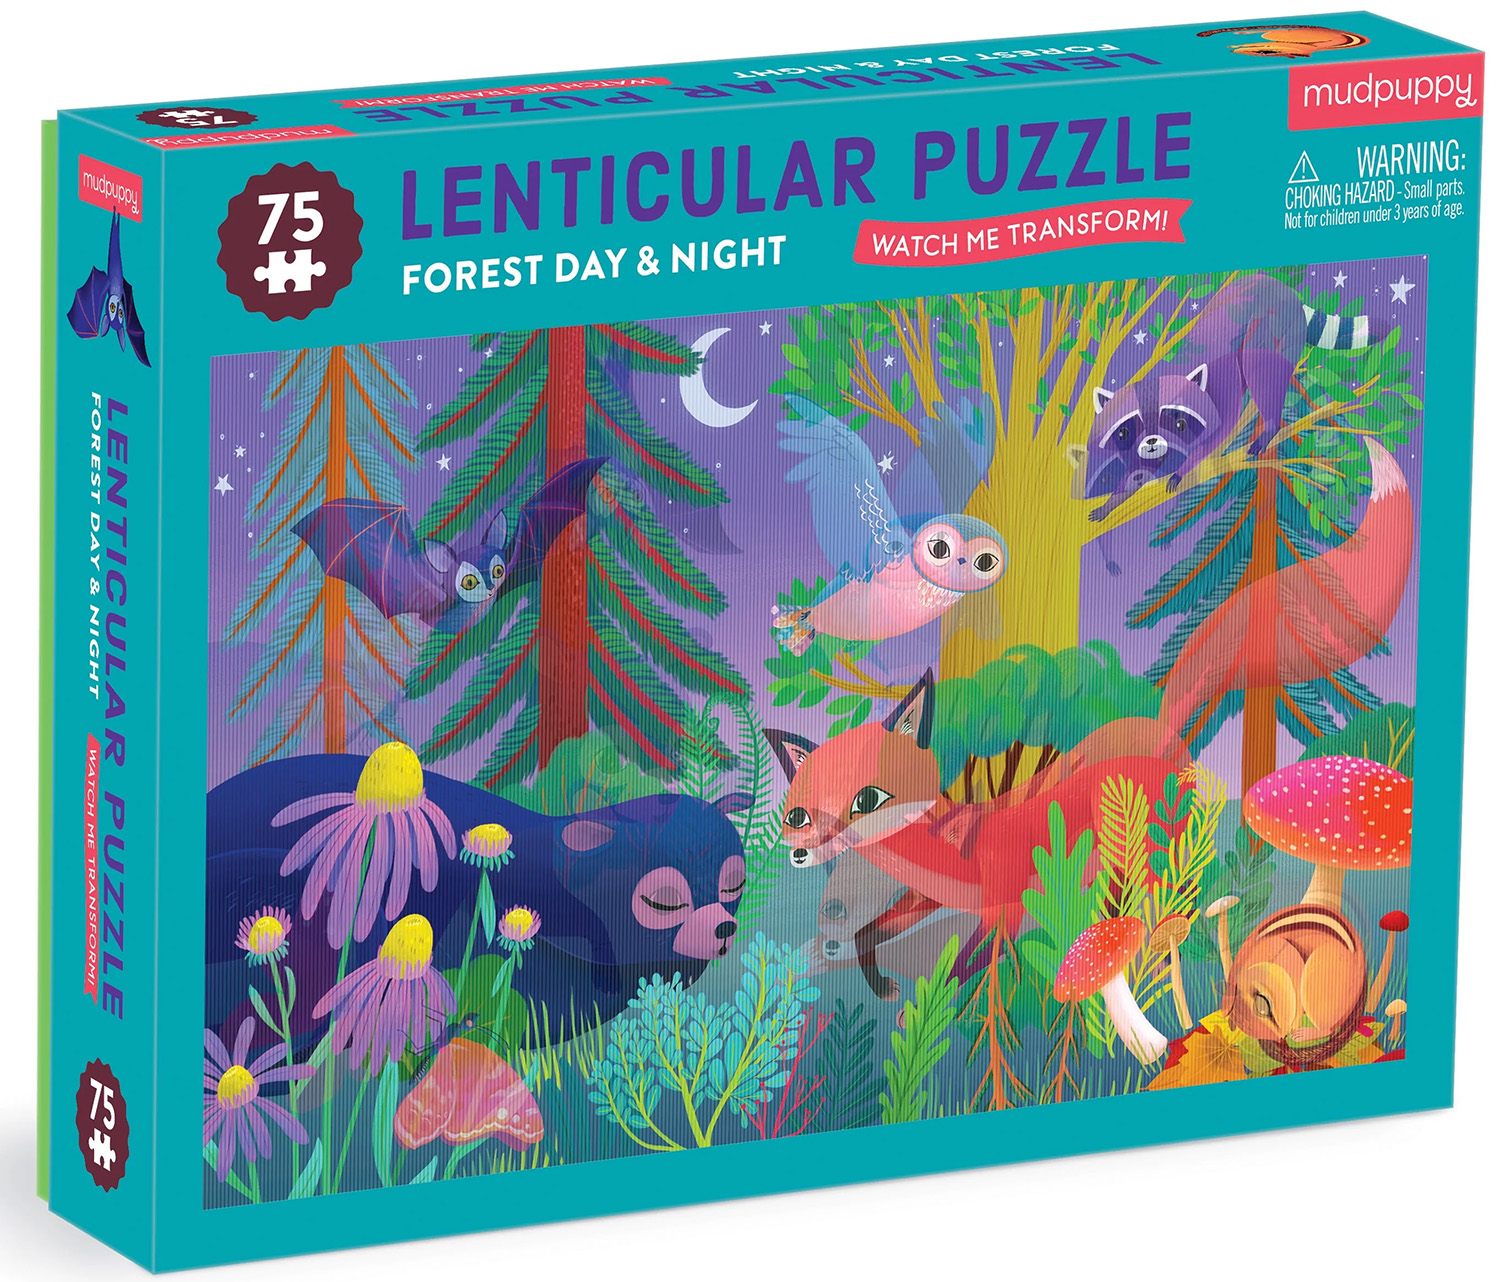 Forest Day & Night Lenticular Puzzle